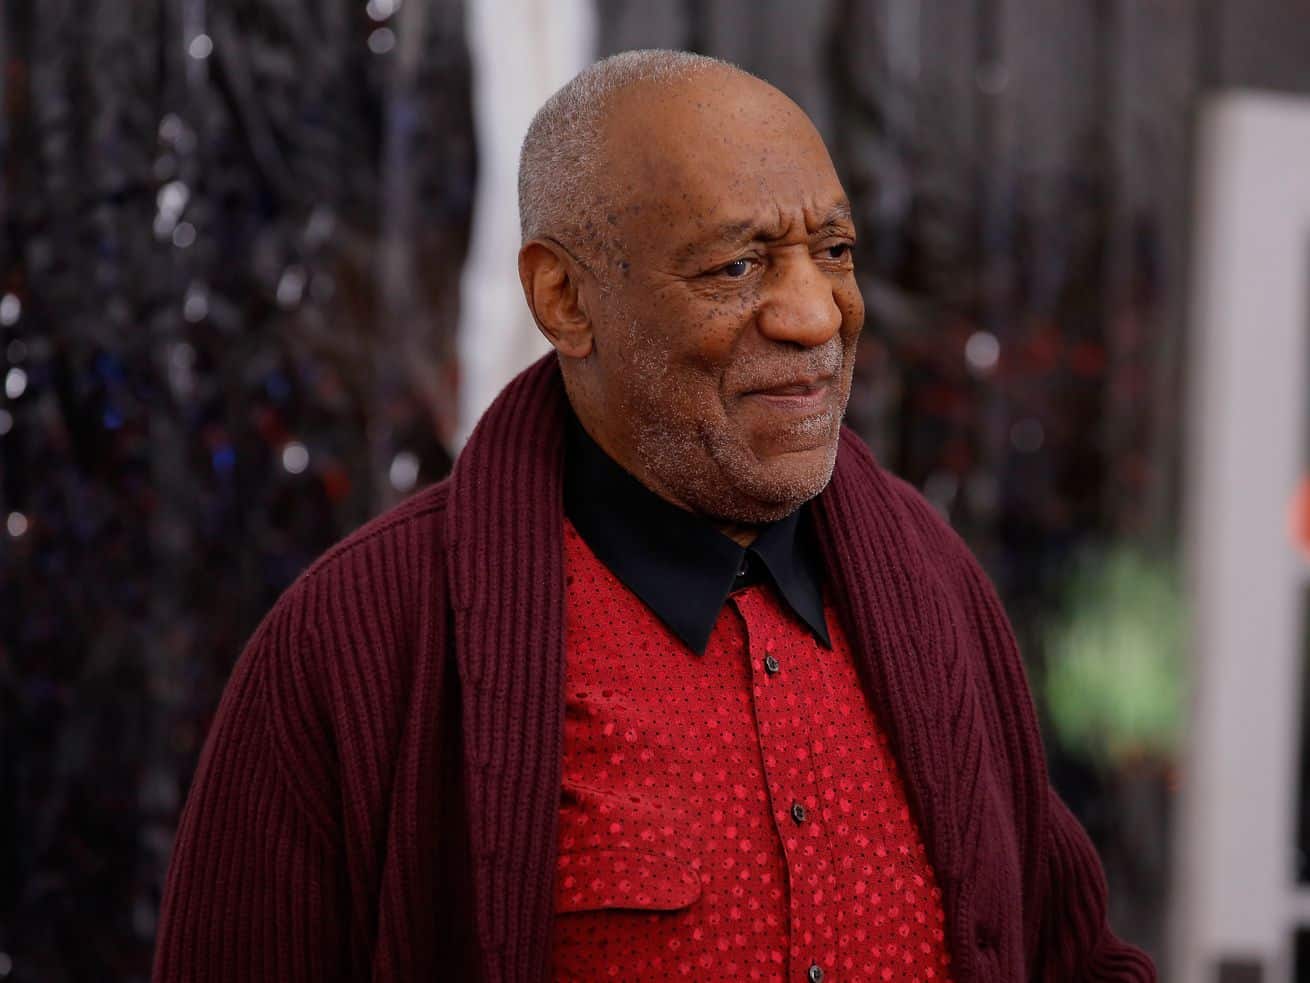 Bill Cosby rape allegations: What you need to know